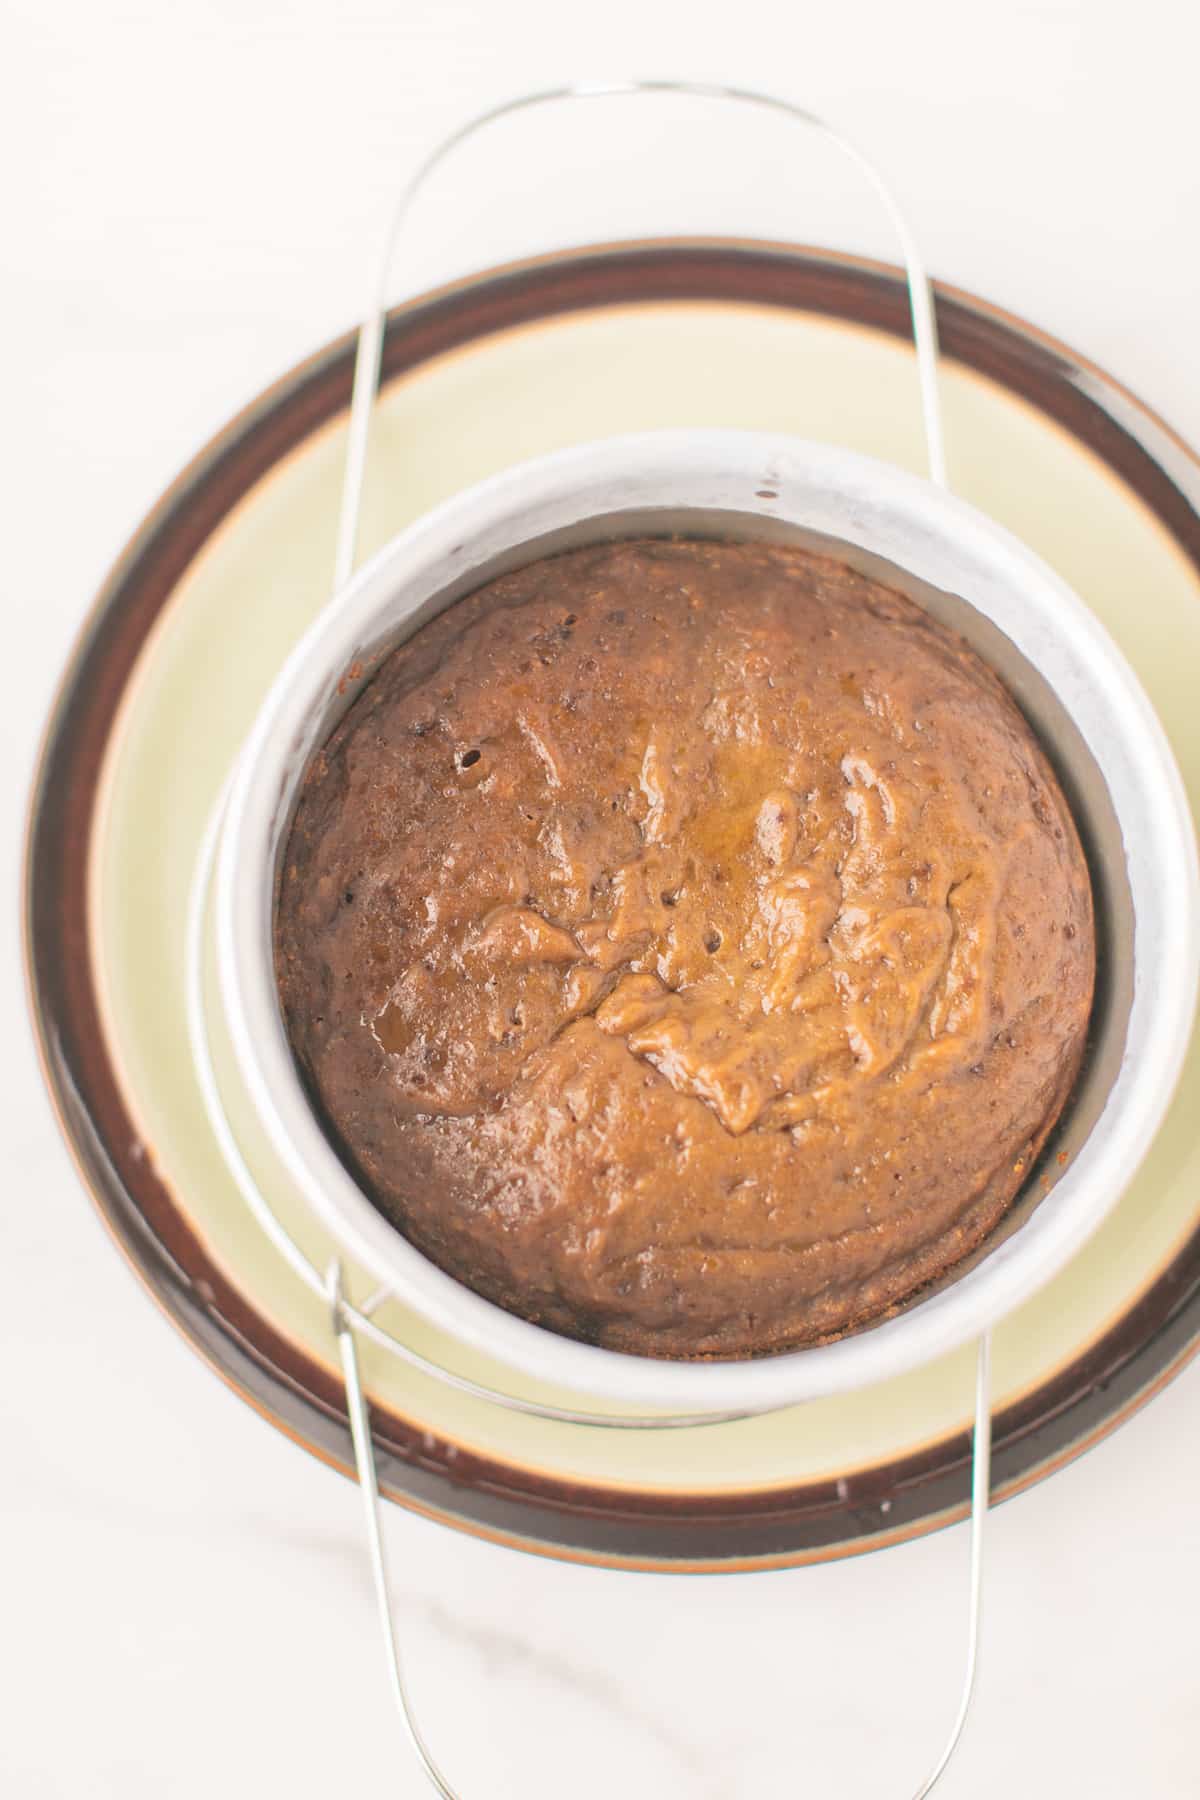 baked cake done cooking in the instant pot